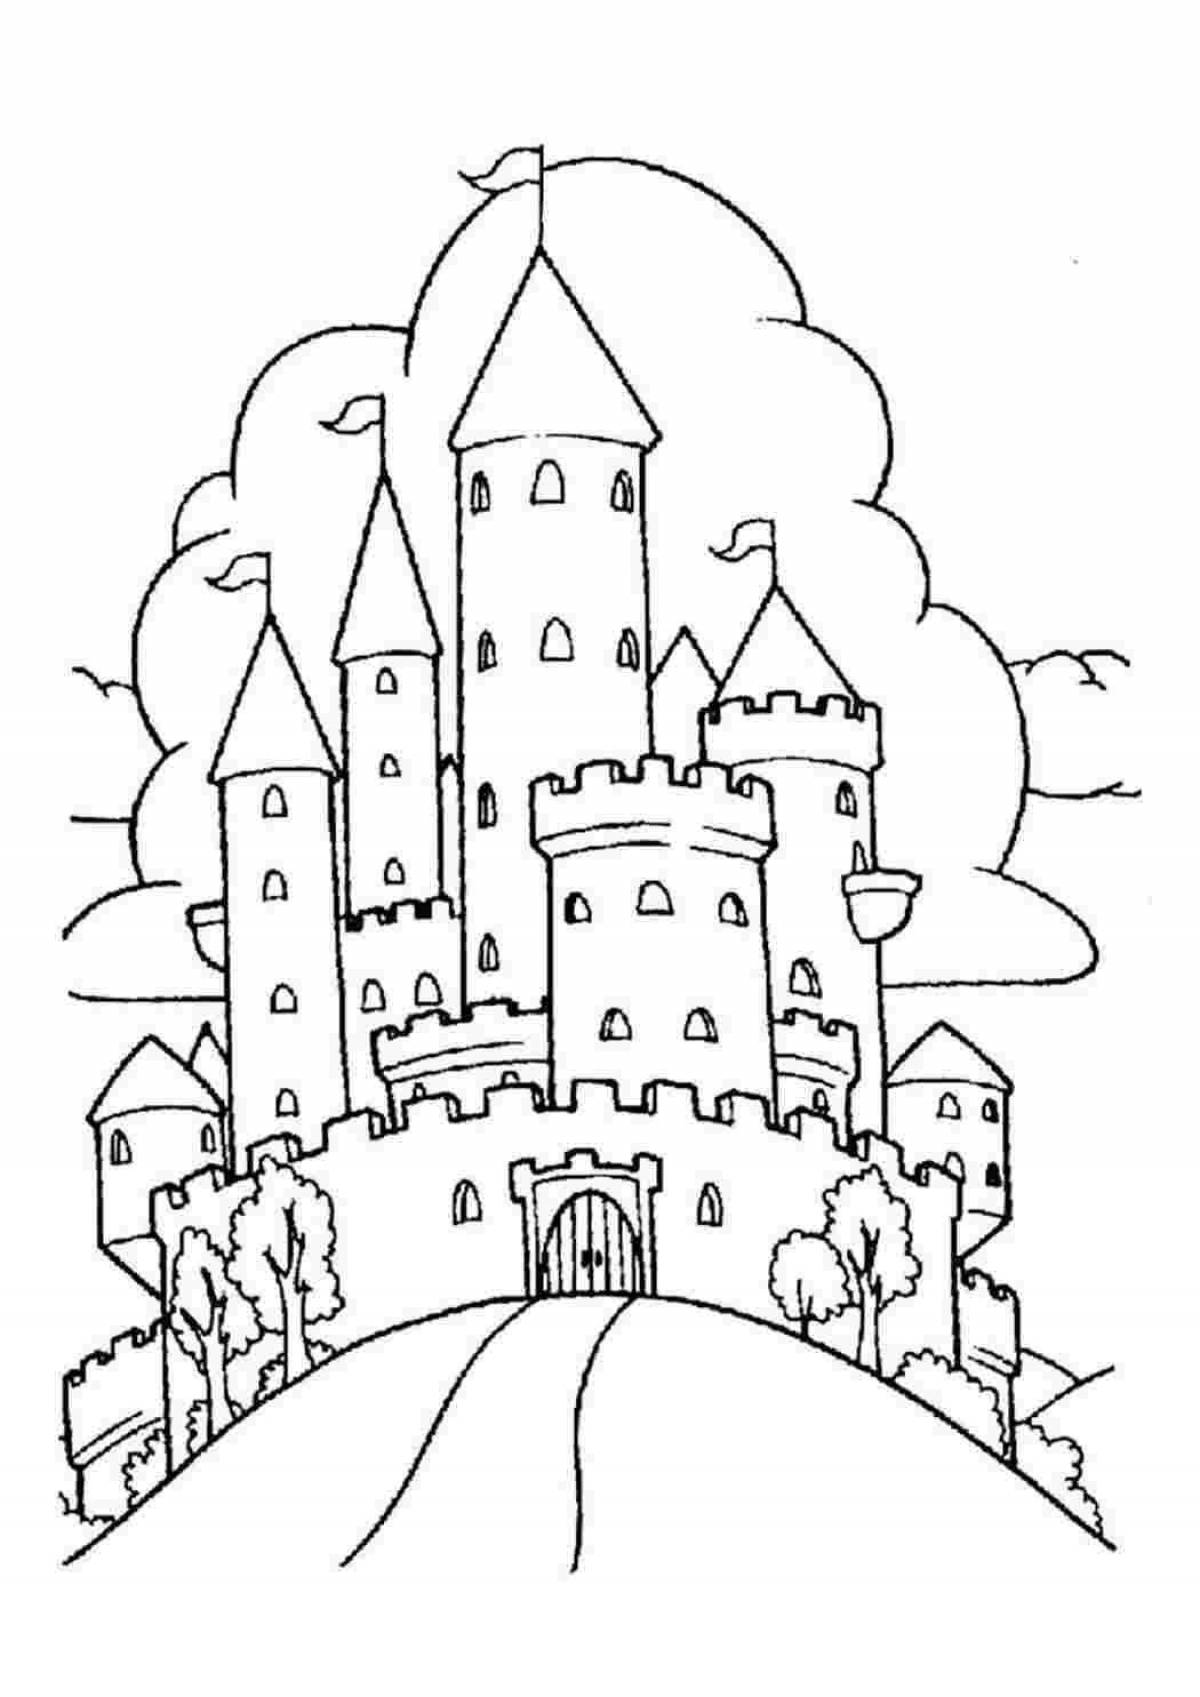 Coloring the majestic palace for children